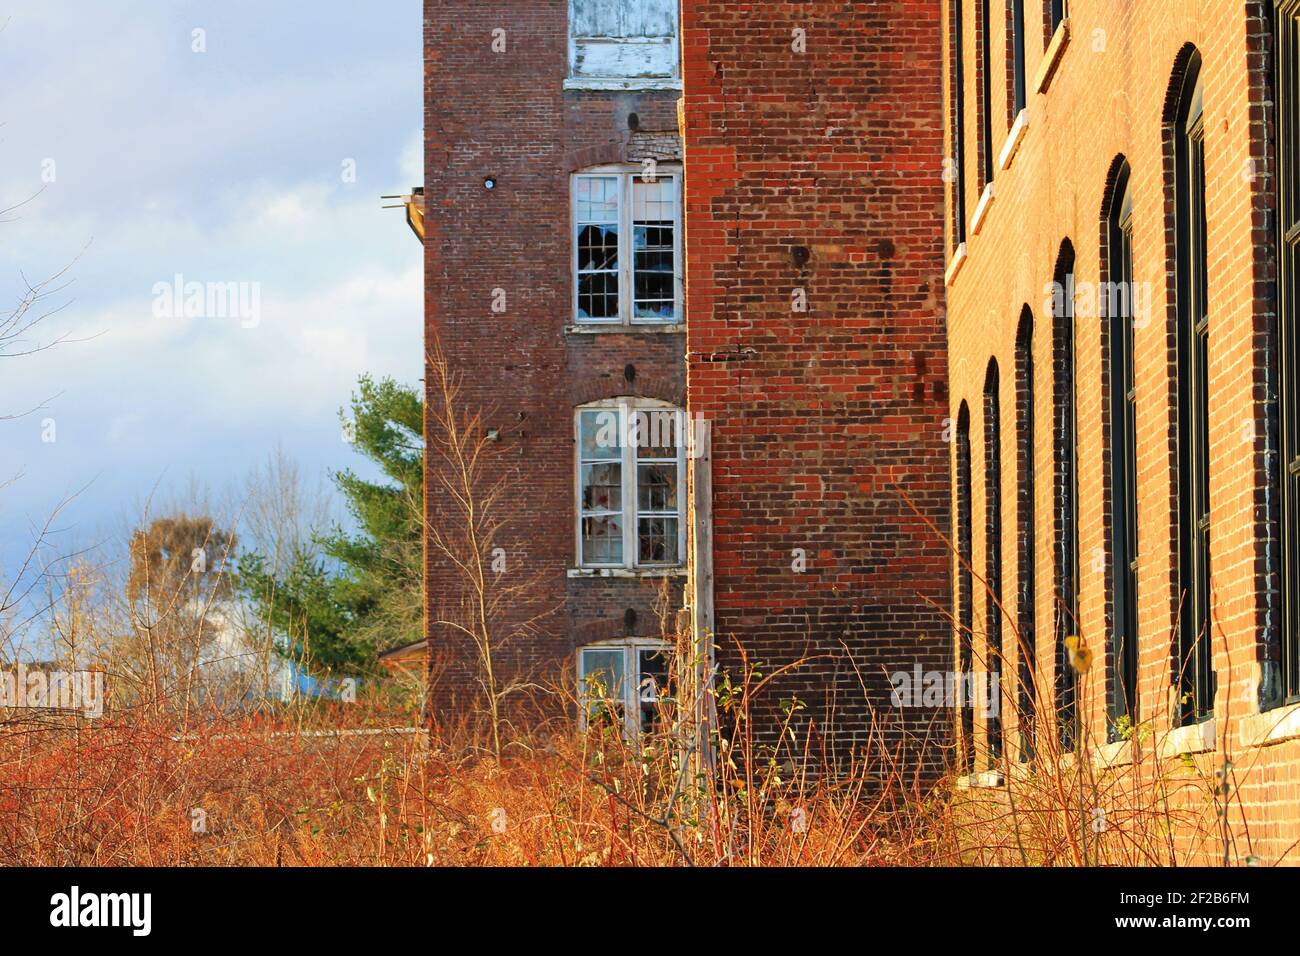 An old, abandoned, brick building that is falling into ruin, with broken windows and overgrown yard. Stock Photo